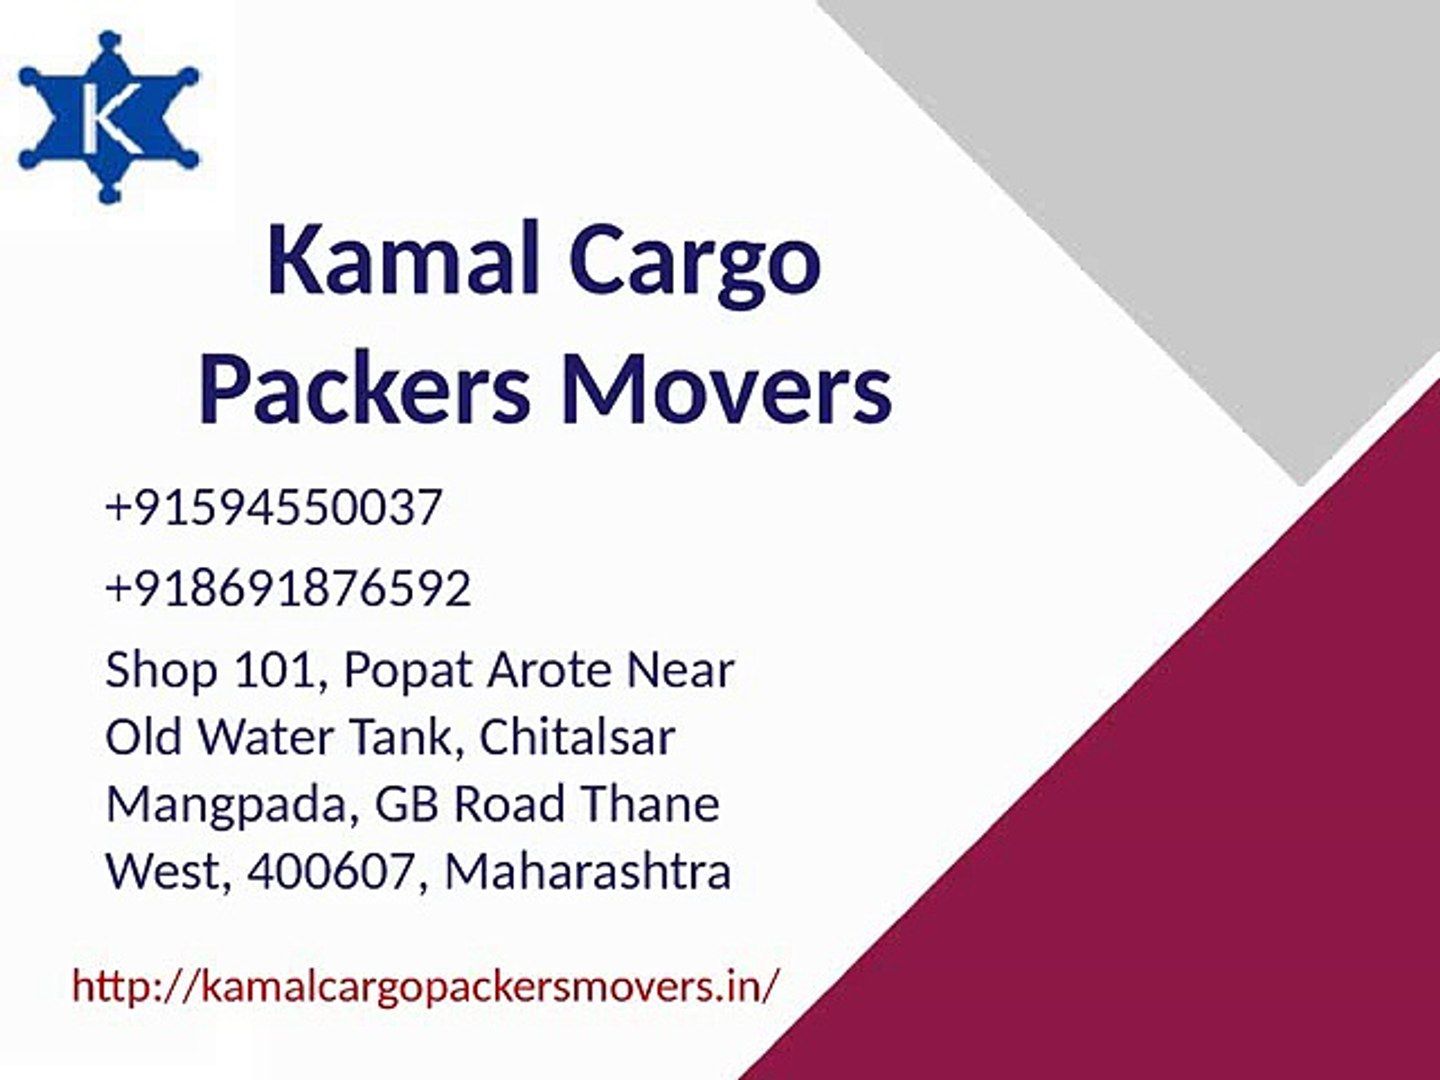 movers and packers in mumbai